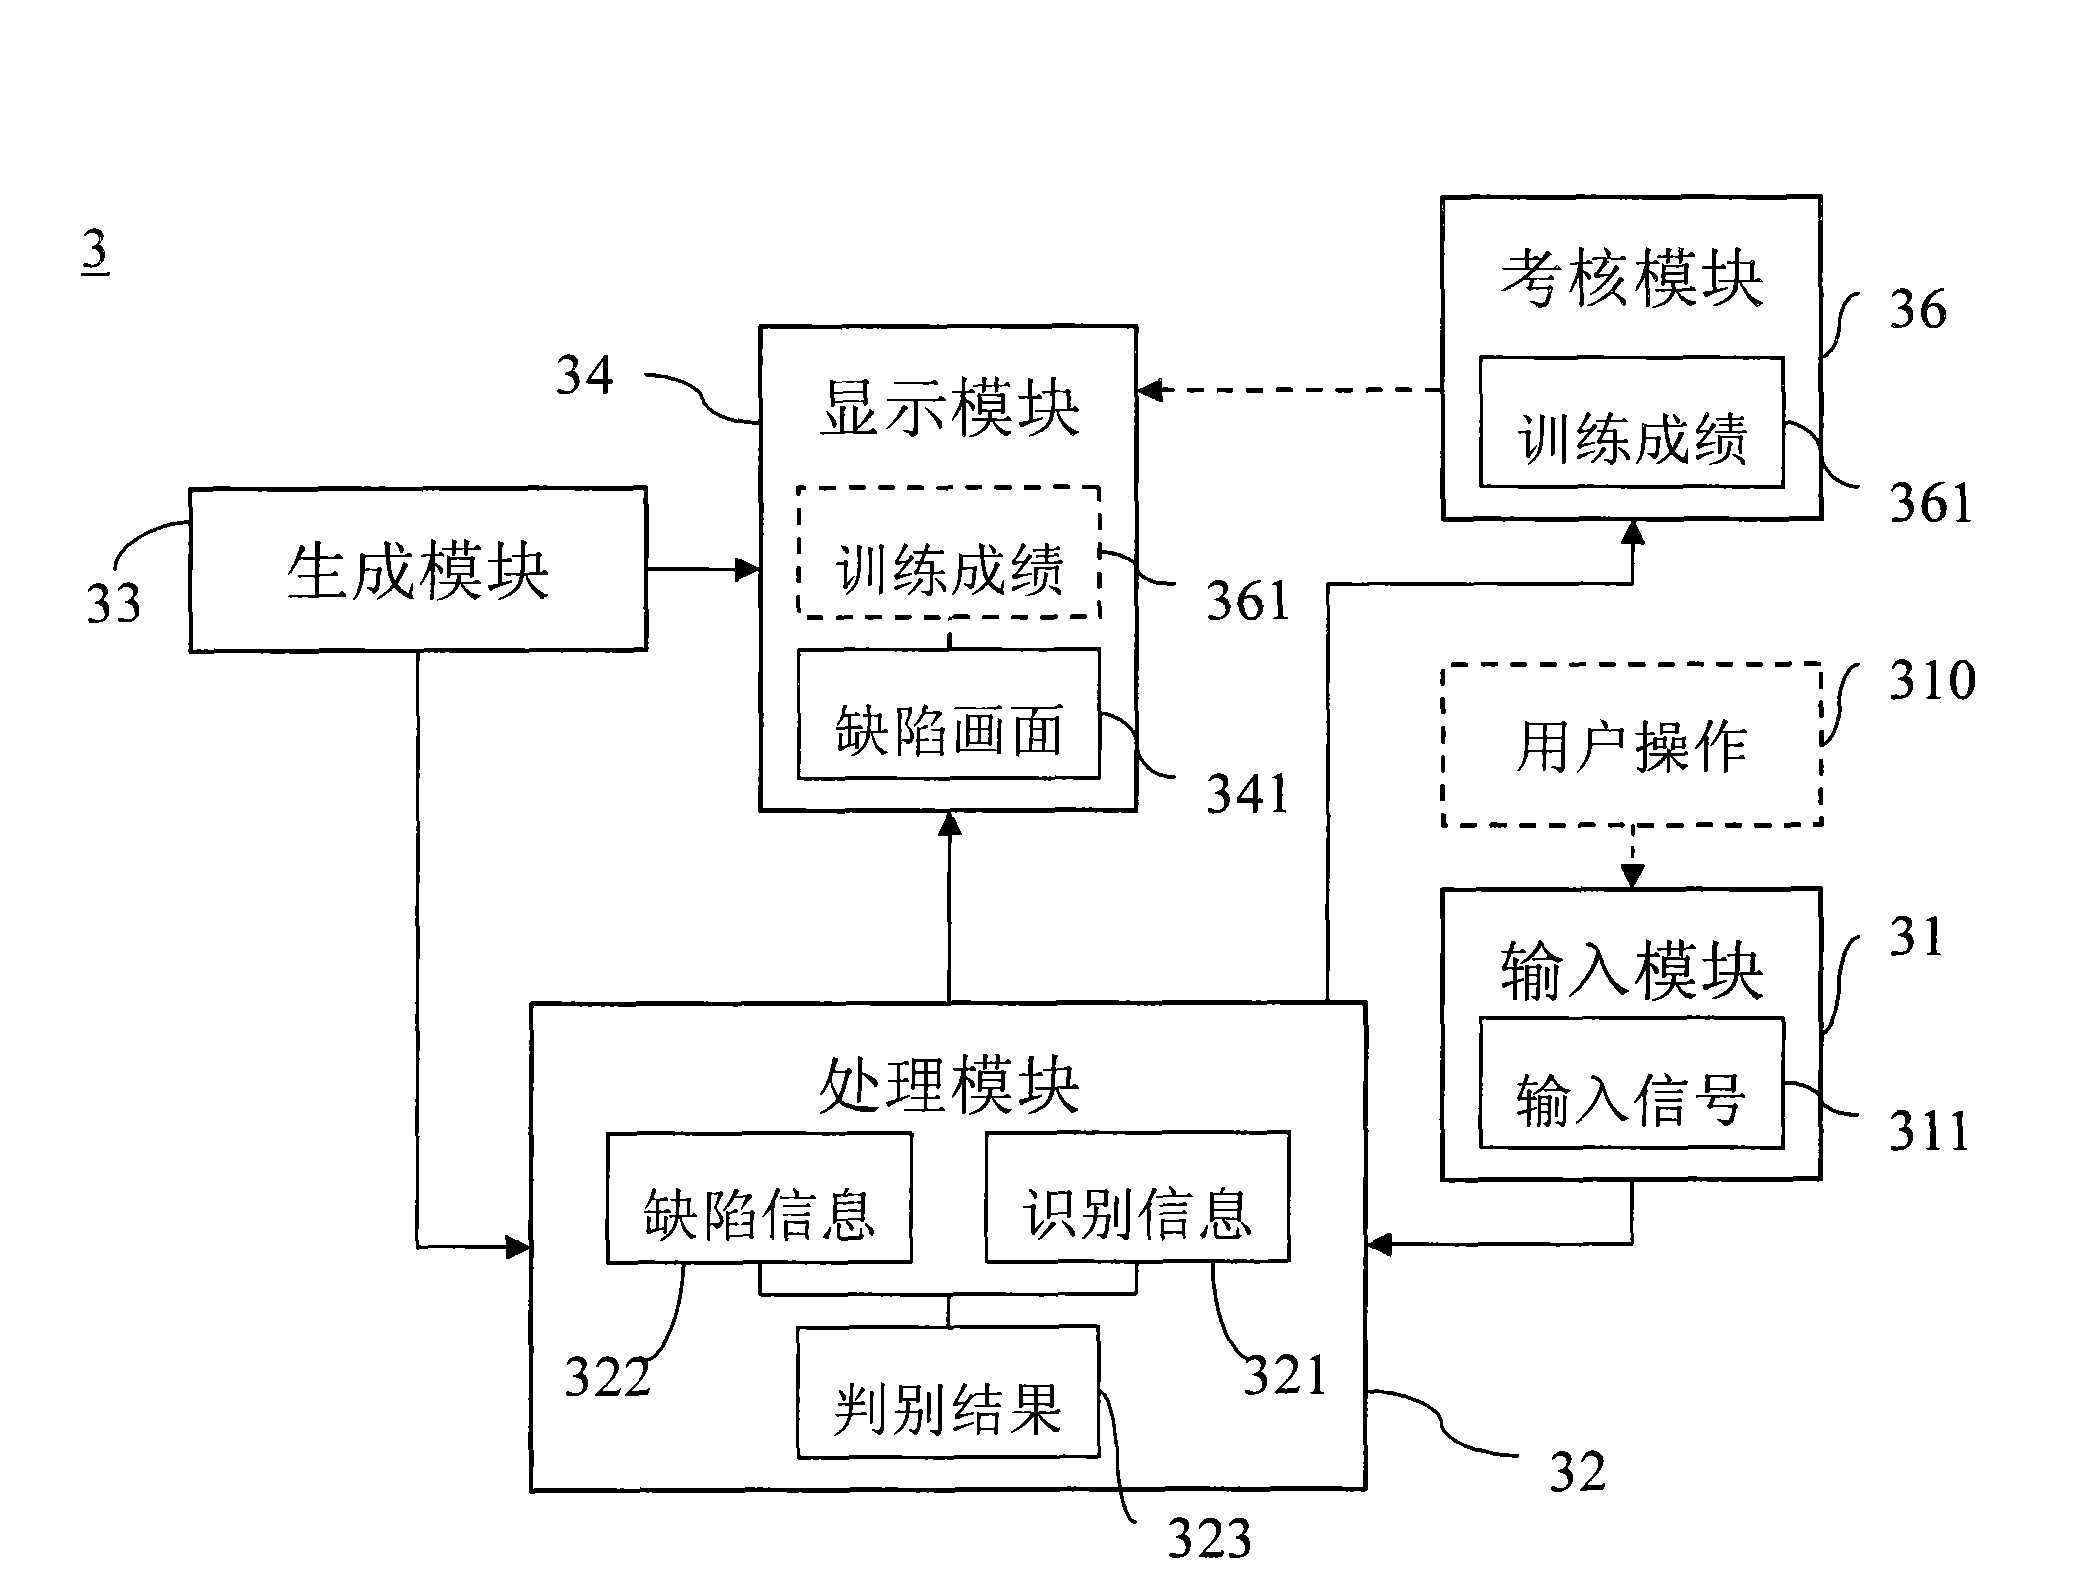 Training system for identifying defects of display panel